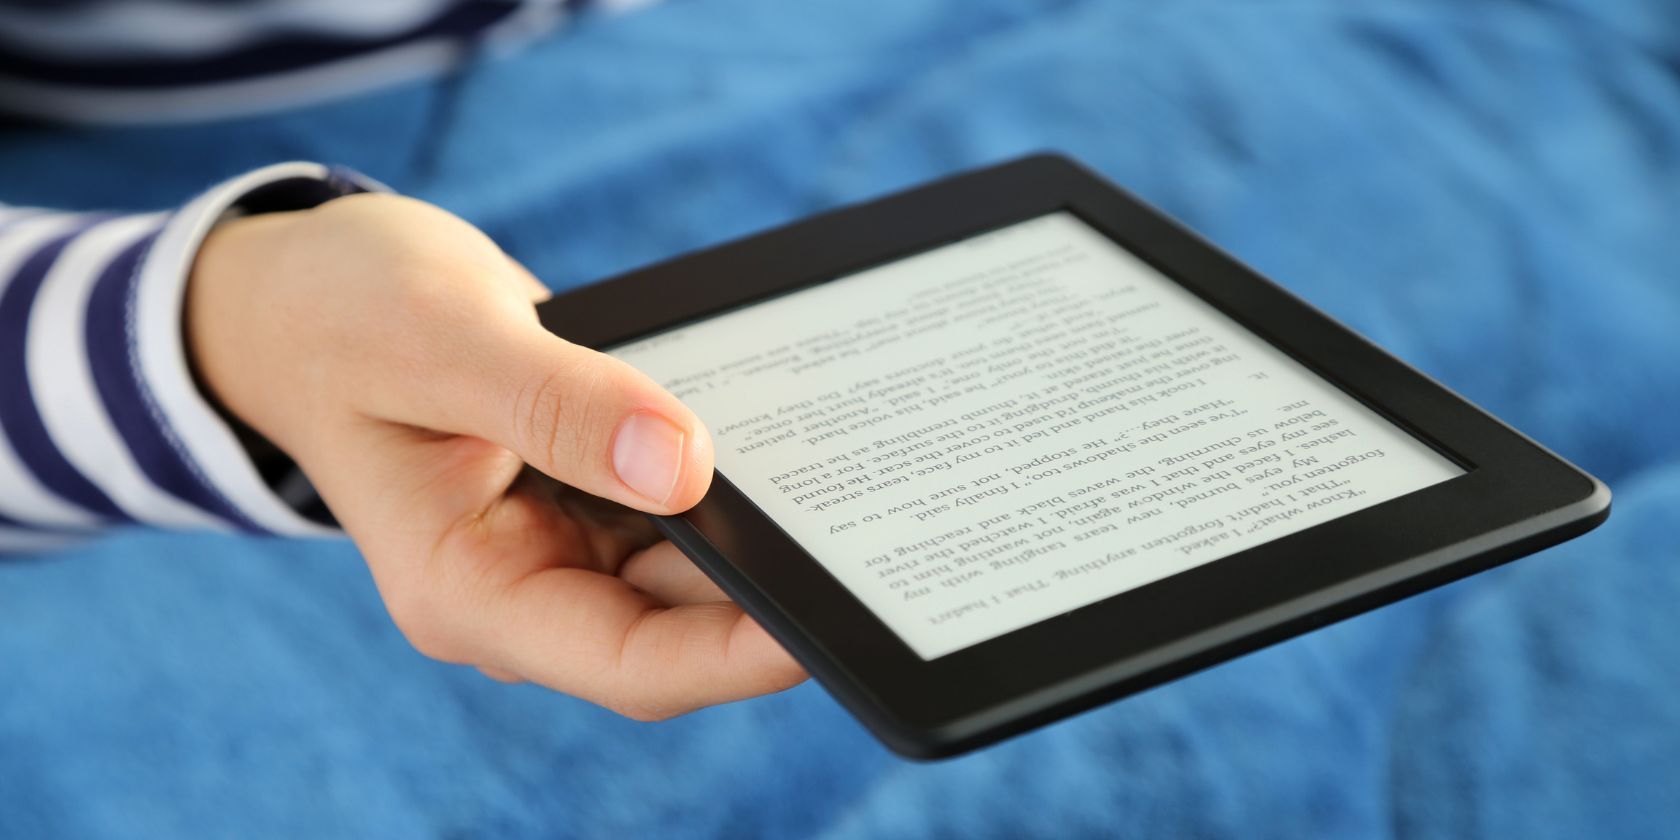 kindle ereader held in a woman's hand